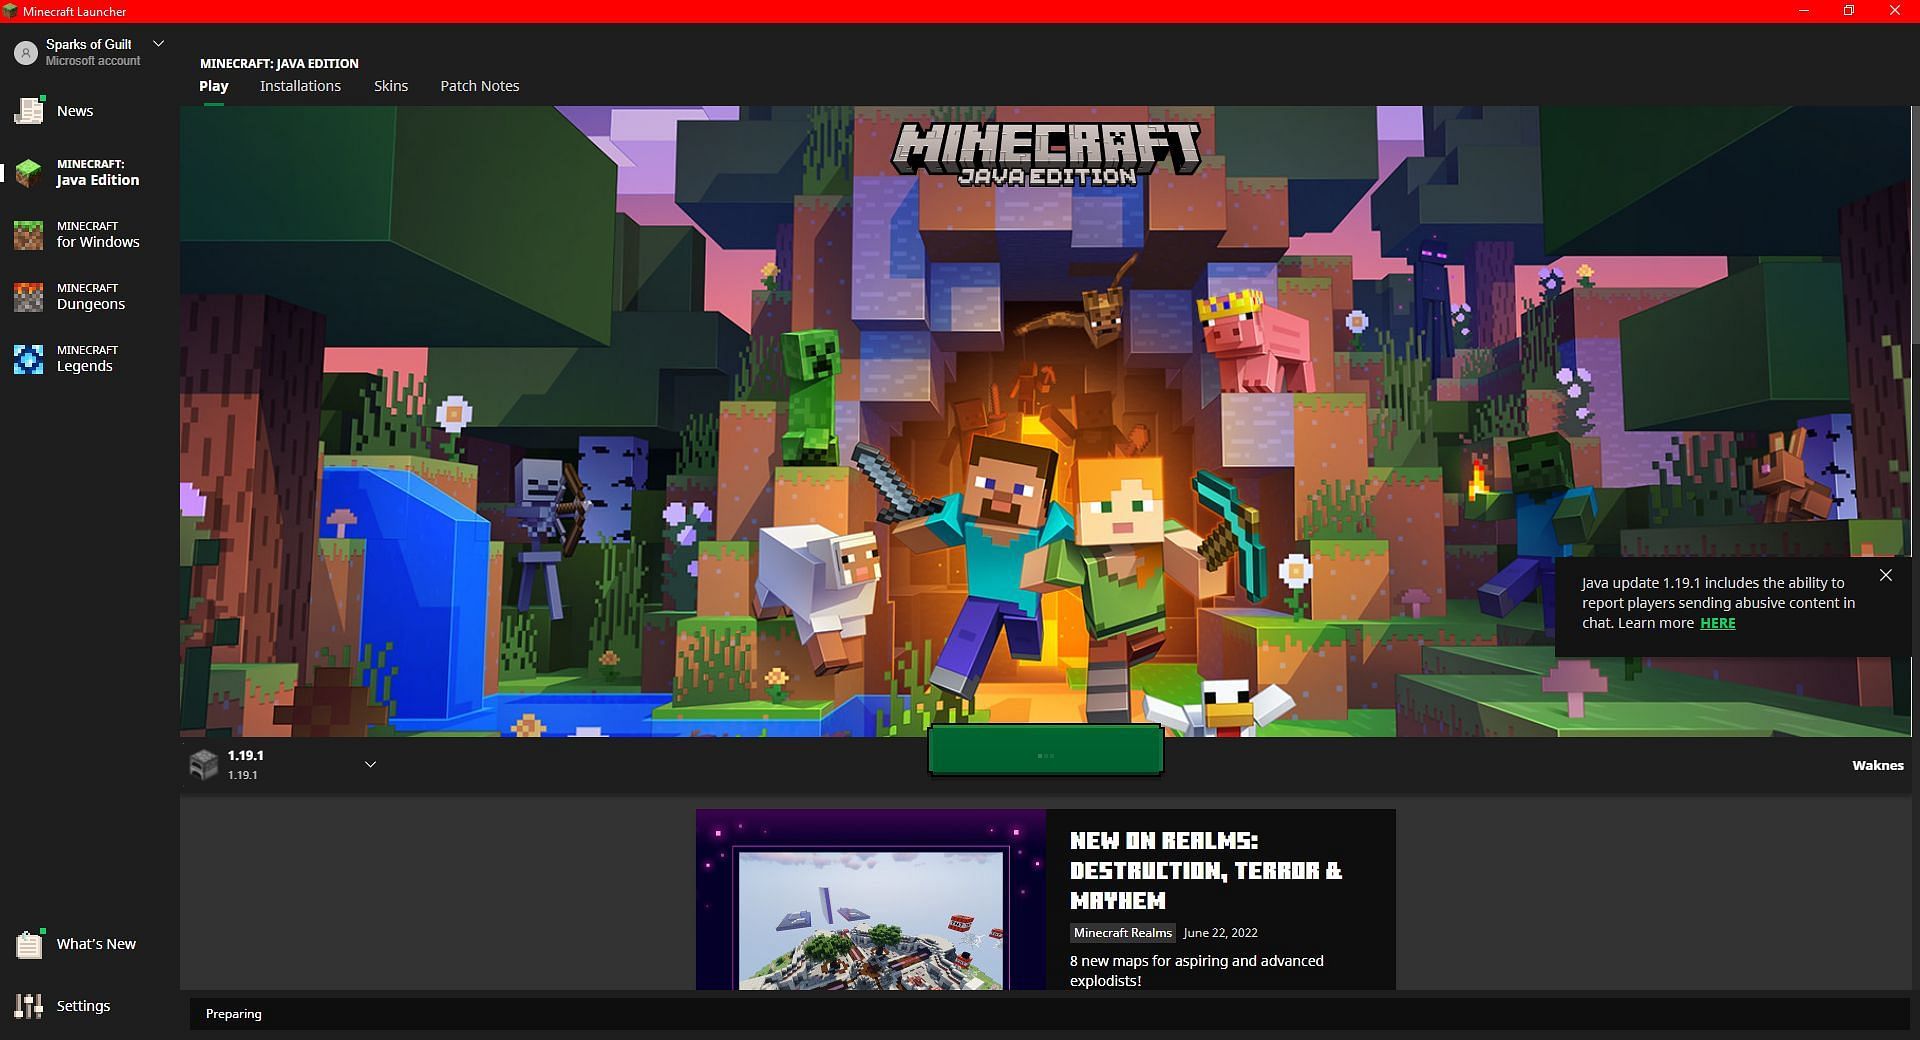 The game launcher preparing an installation (Image via Minecraft Launcher)